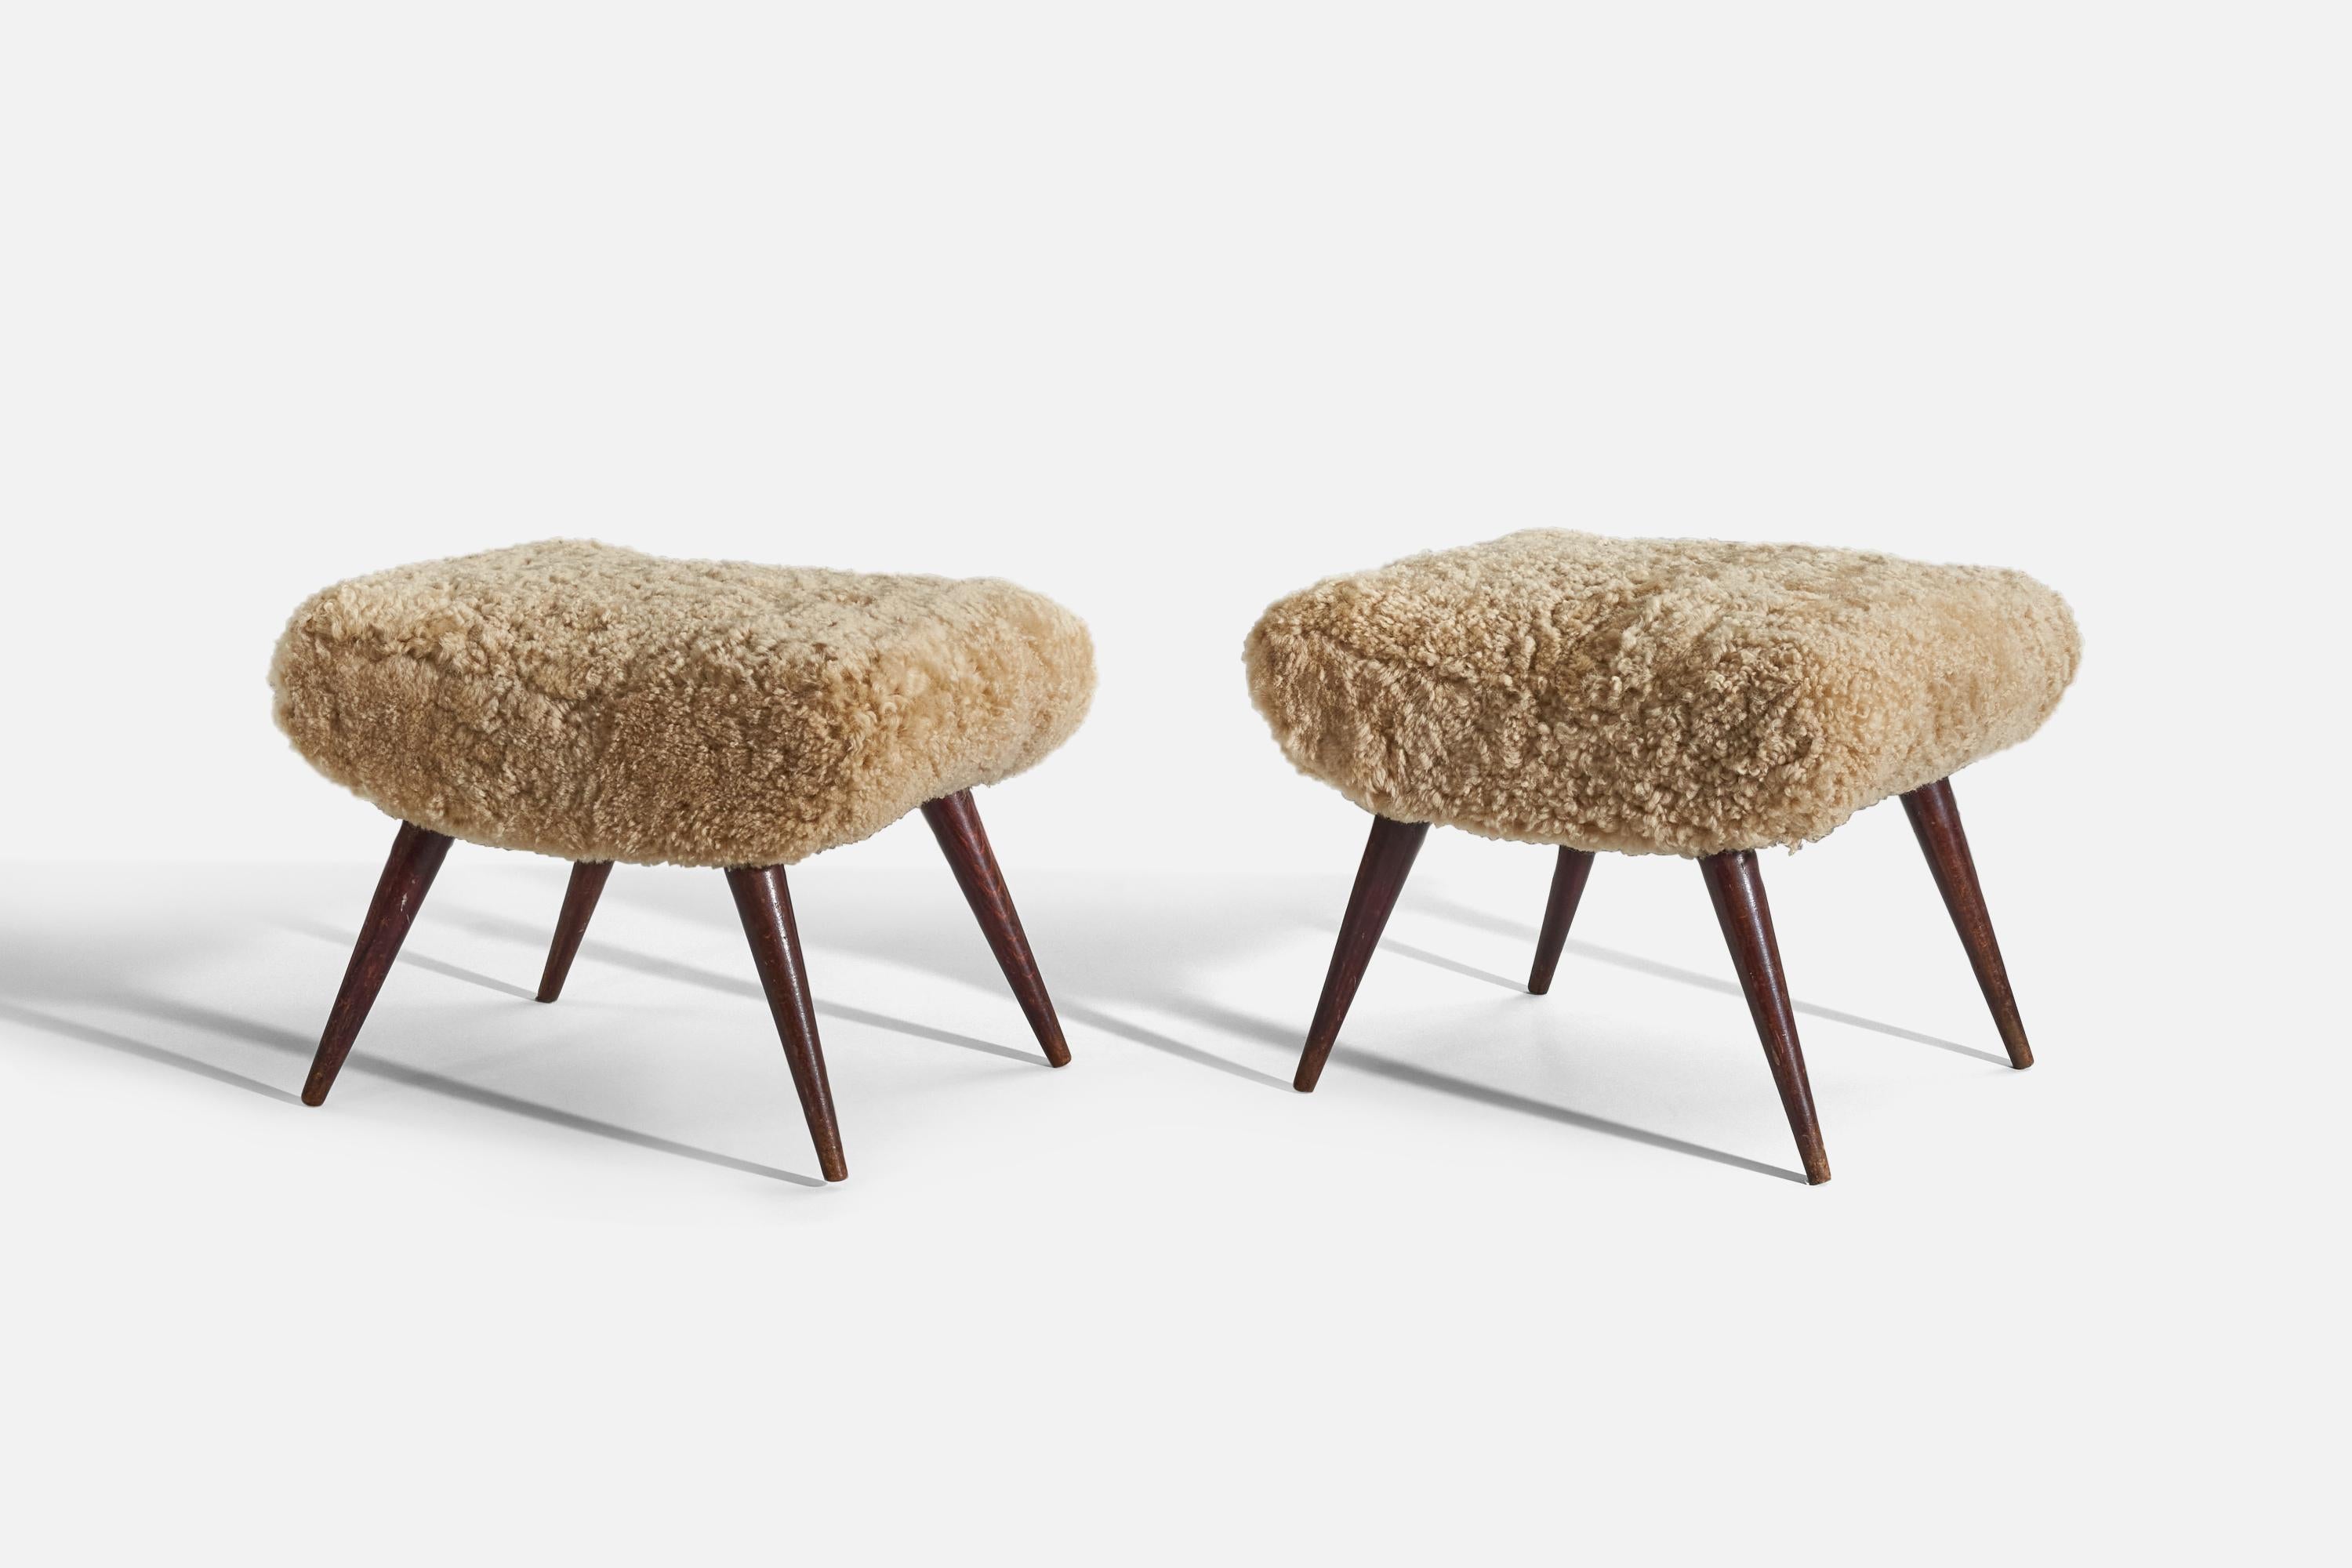 A pair of wood and sheepskin stools designed and produced in Italy, 1940s.

